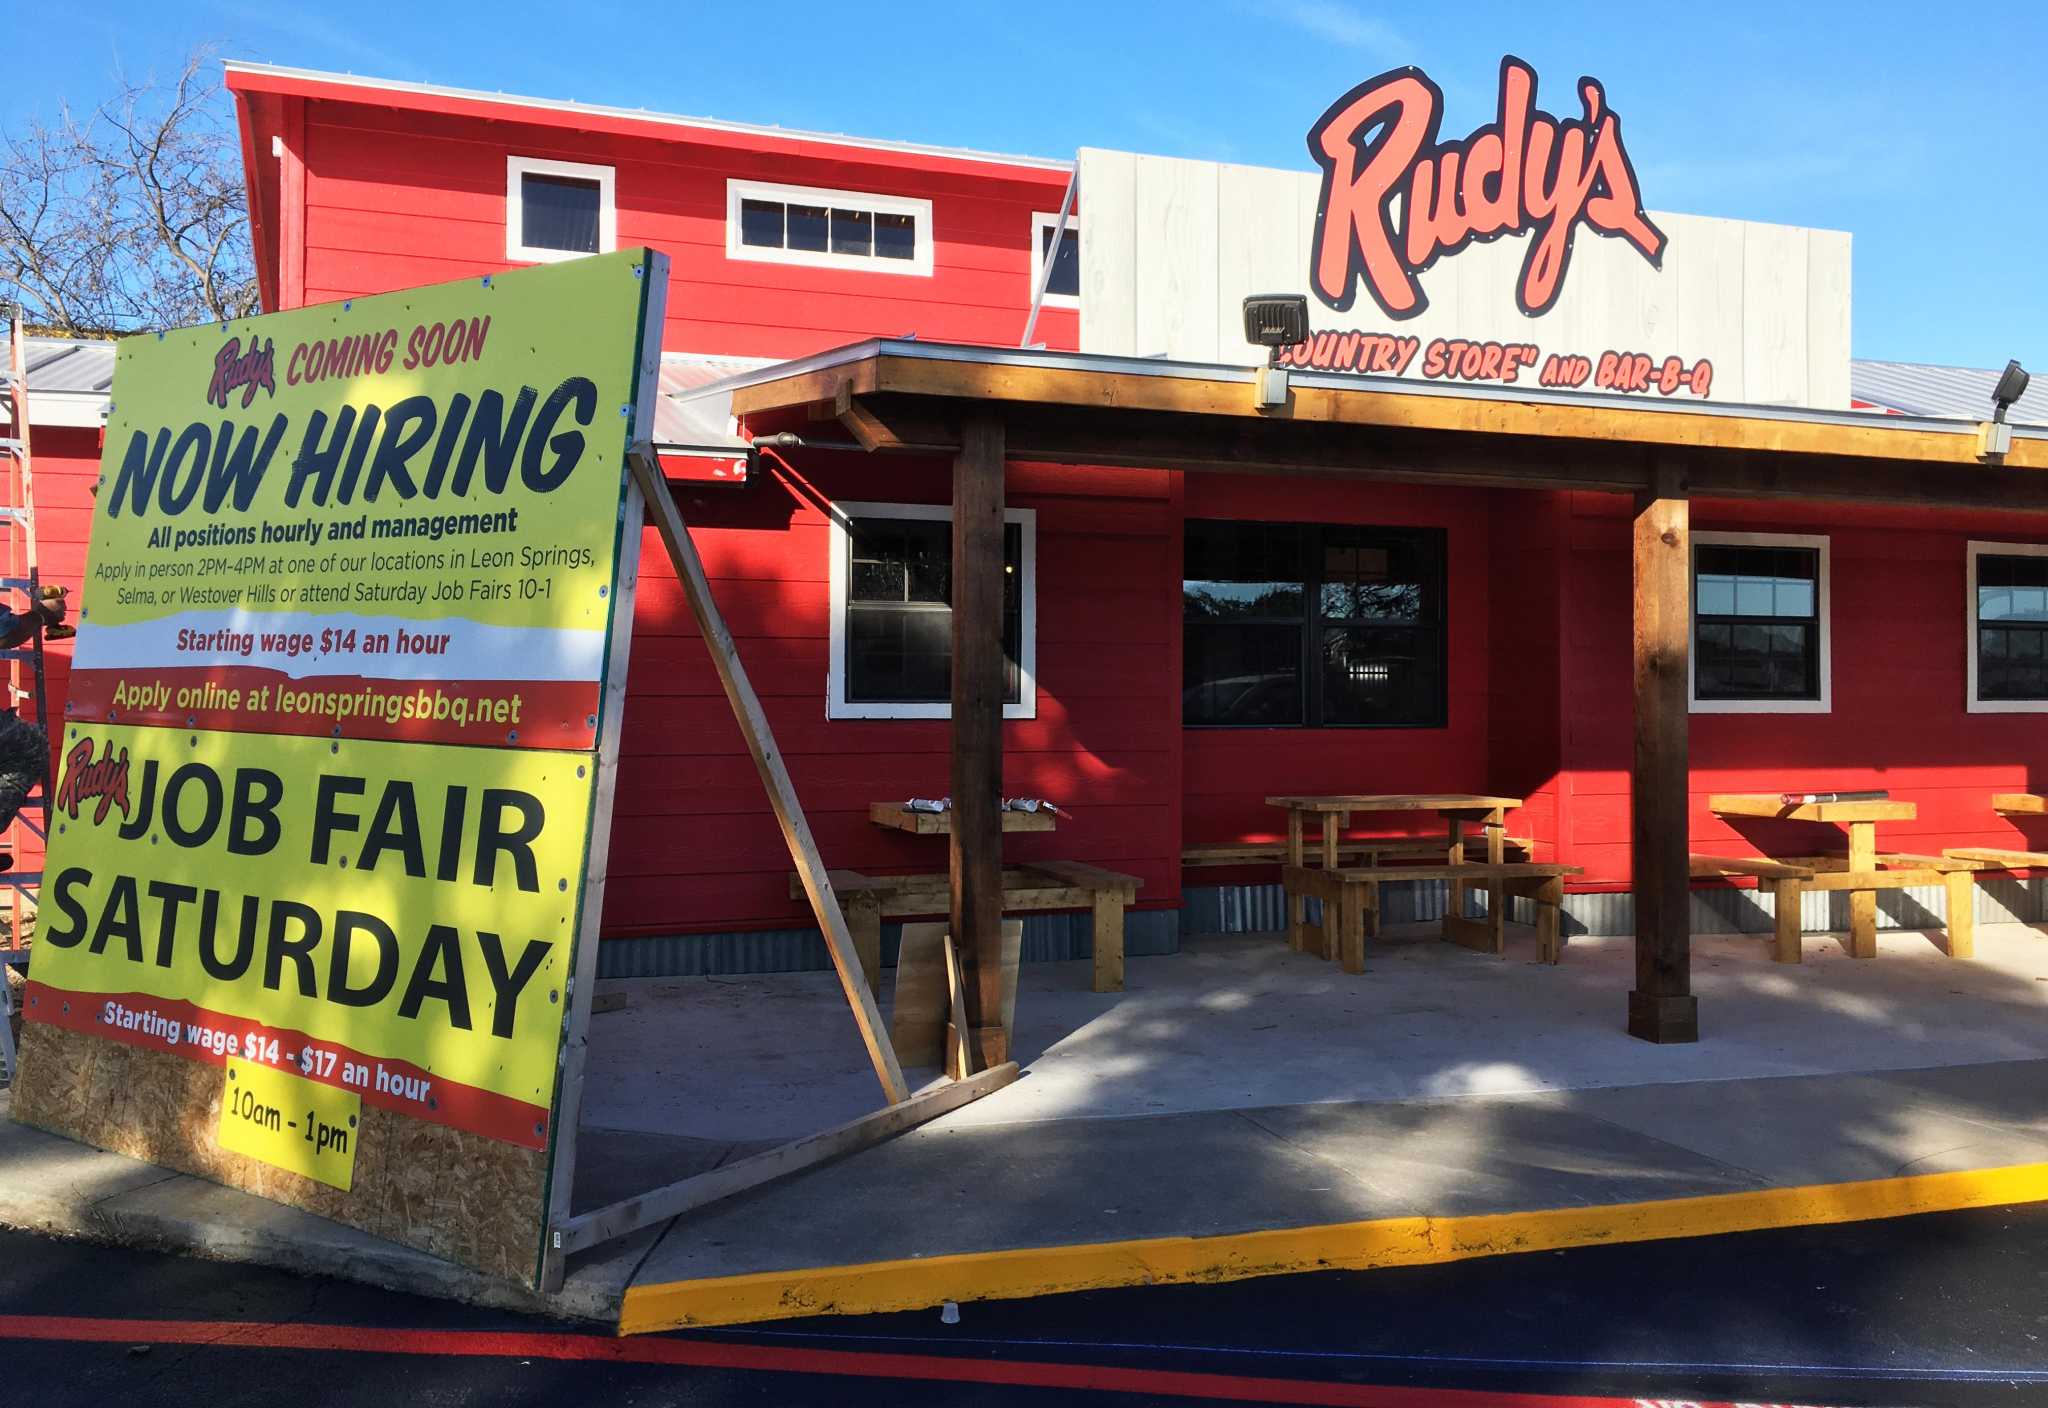 Now open: Rudy’s Country Store and Bar-B-Q barbecue restaurant near San